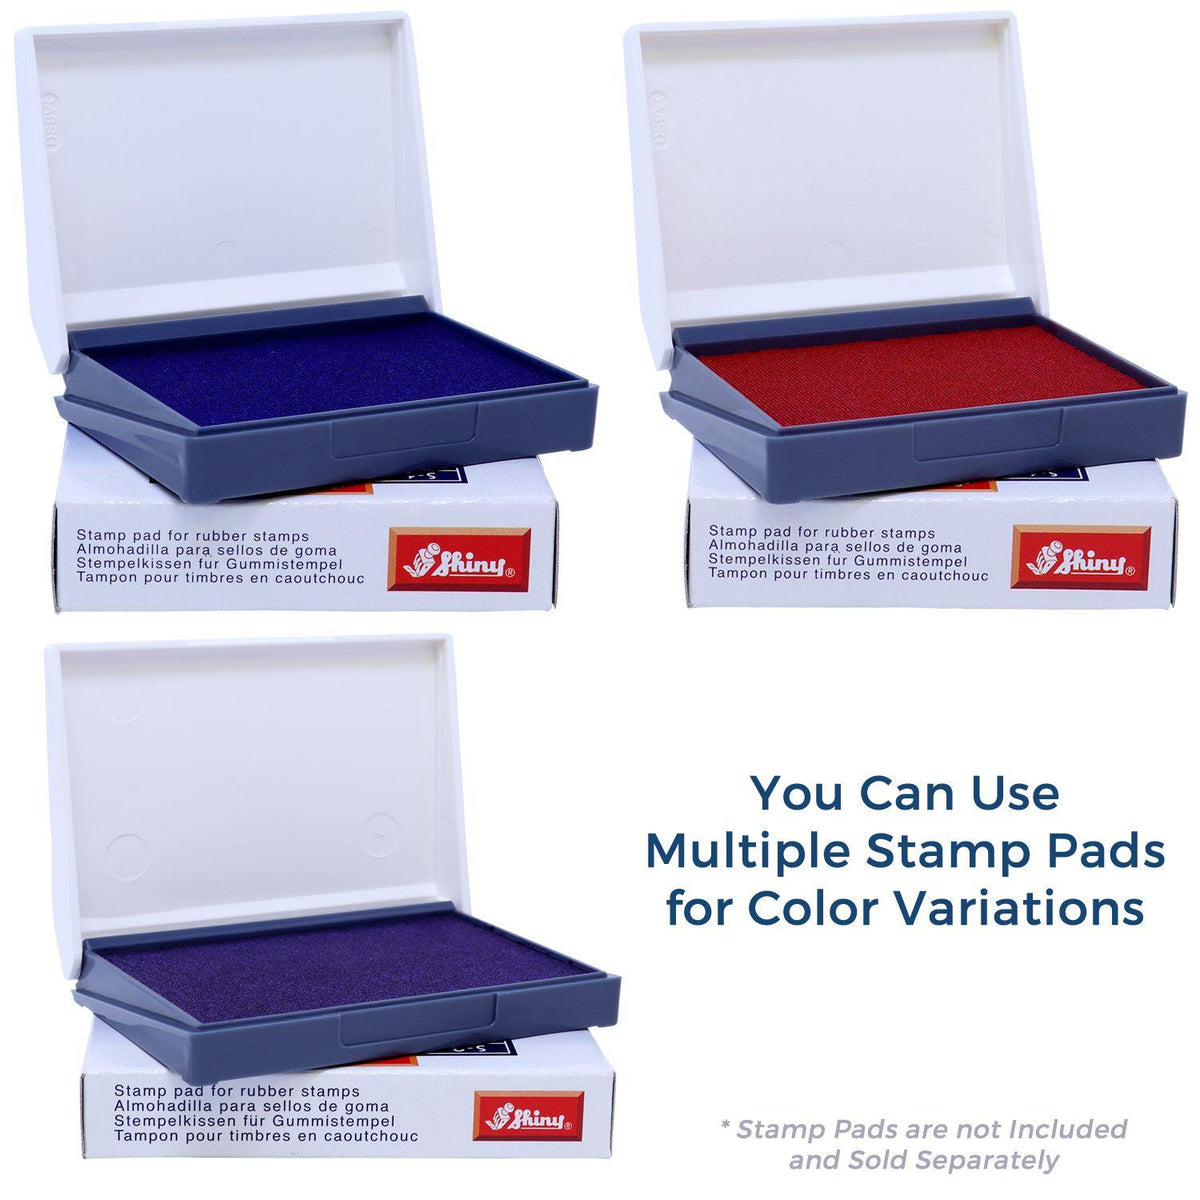 Stamp Pads for Validated Rubber Stamp Available